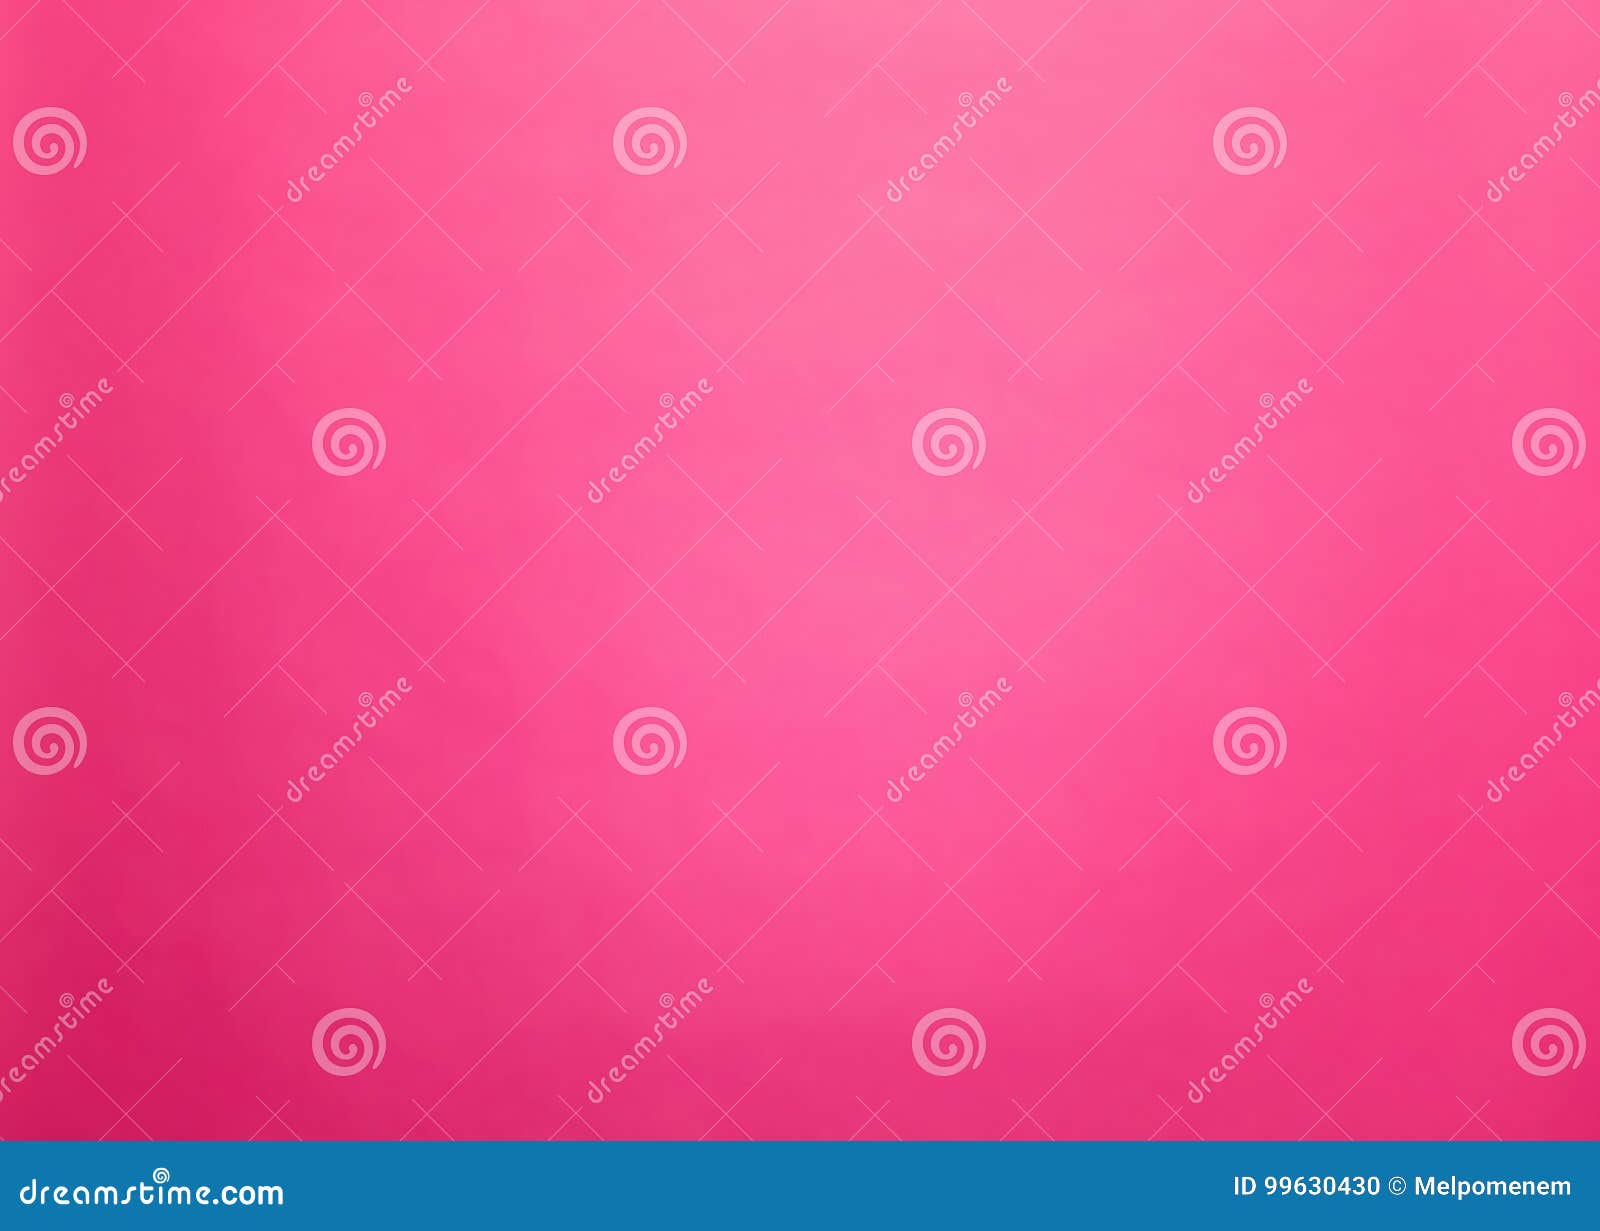 abstract solid color background texture